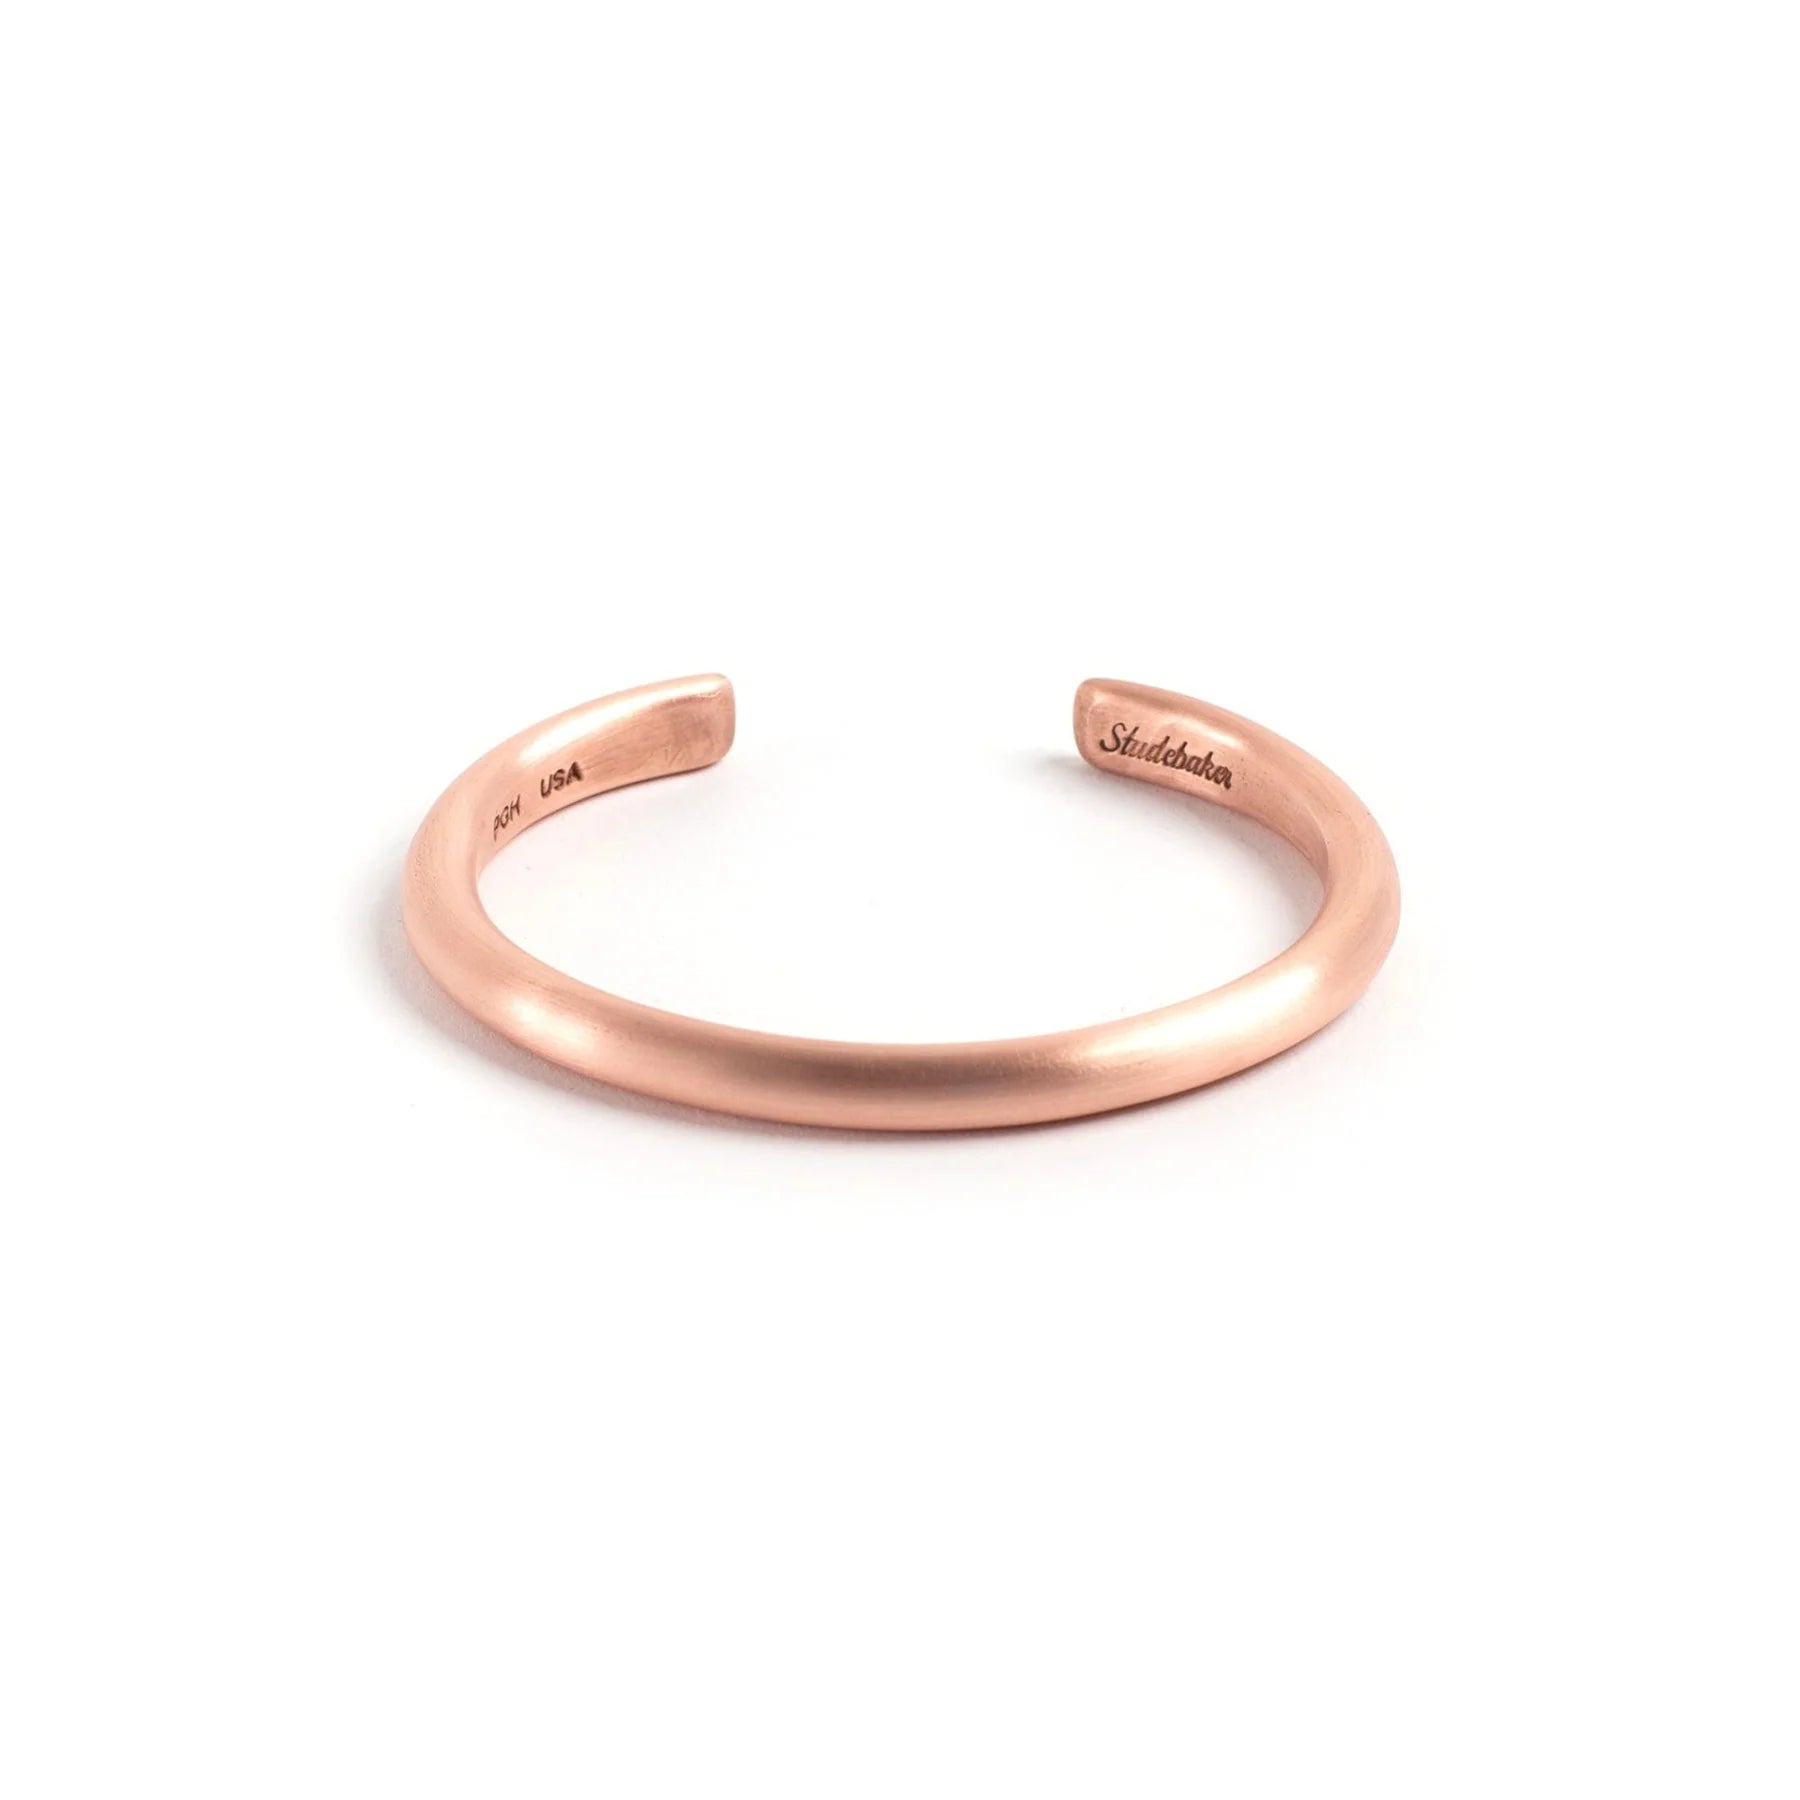 Studebaker - Heavyweight Champion Cuff - Large-Men's Accessories-Copper-Yaletown-Vancouver-Surrey-Canada